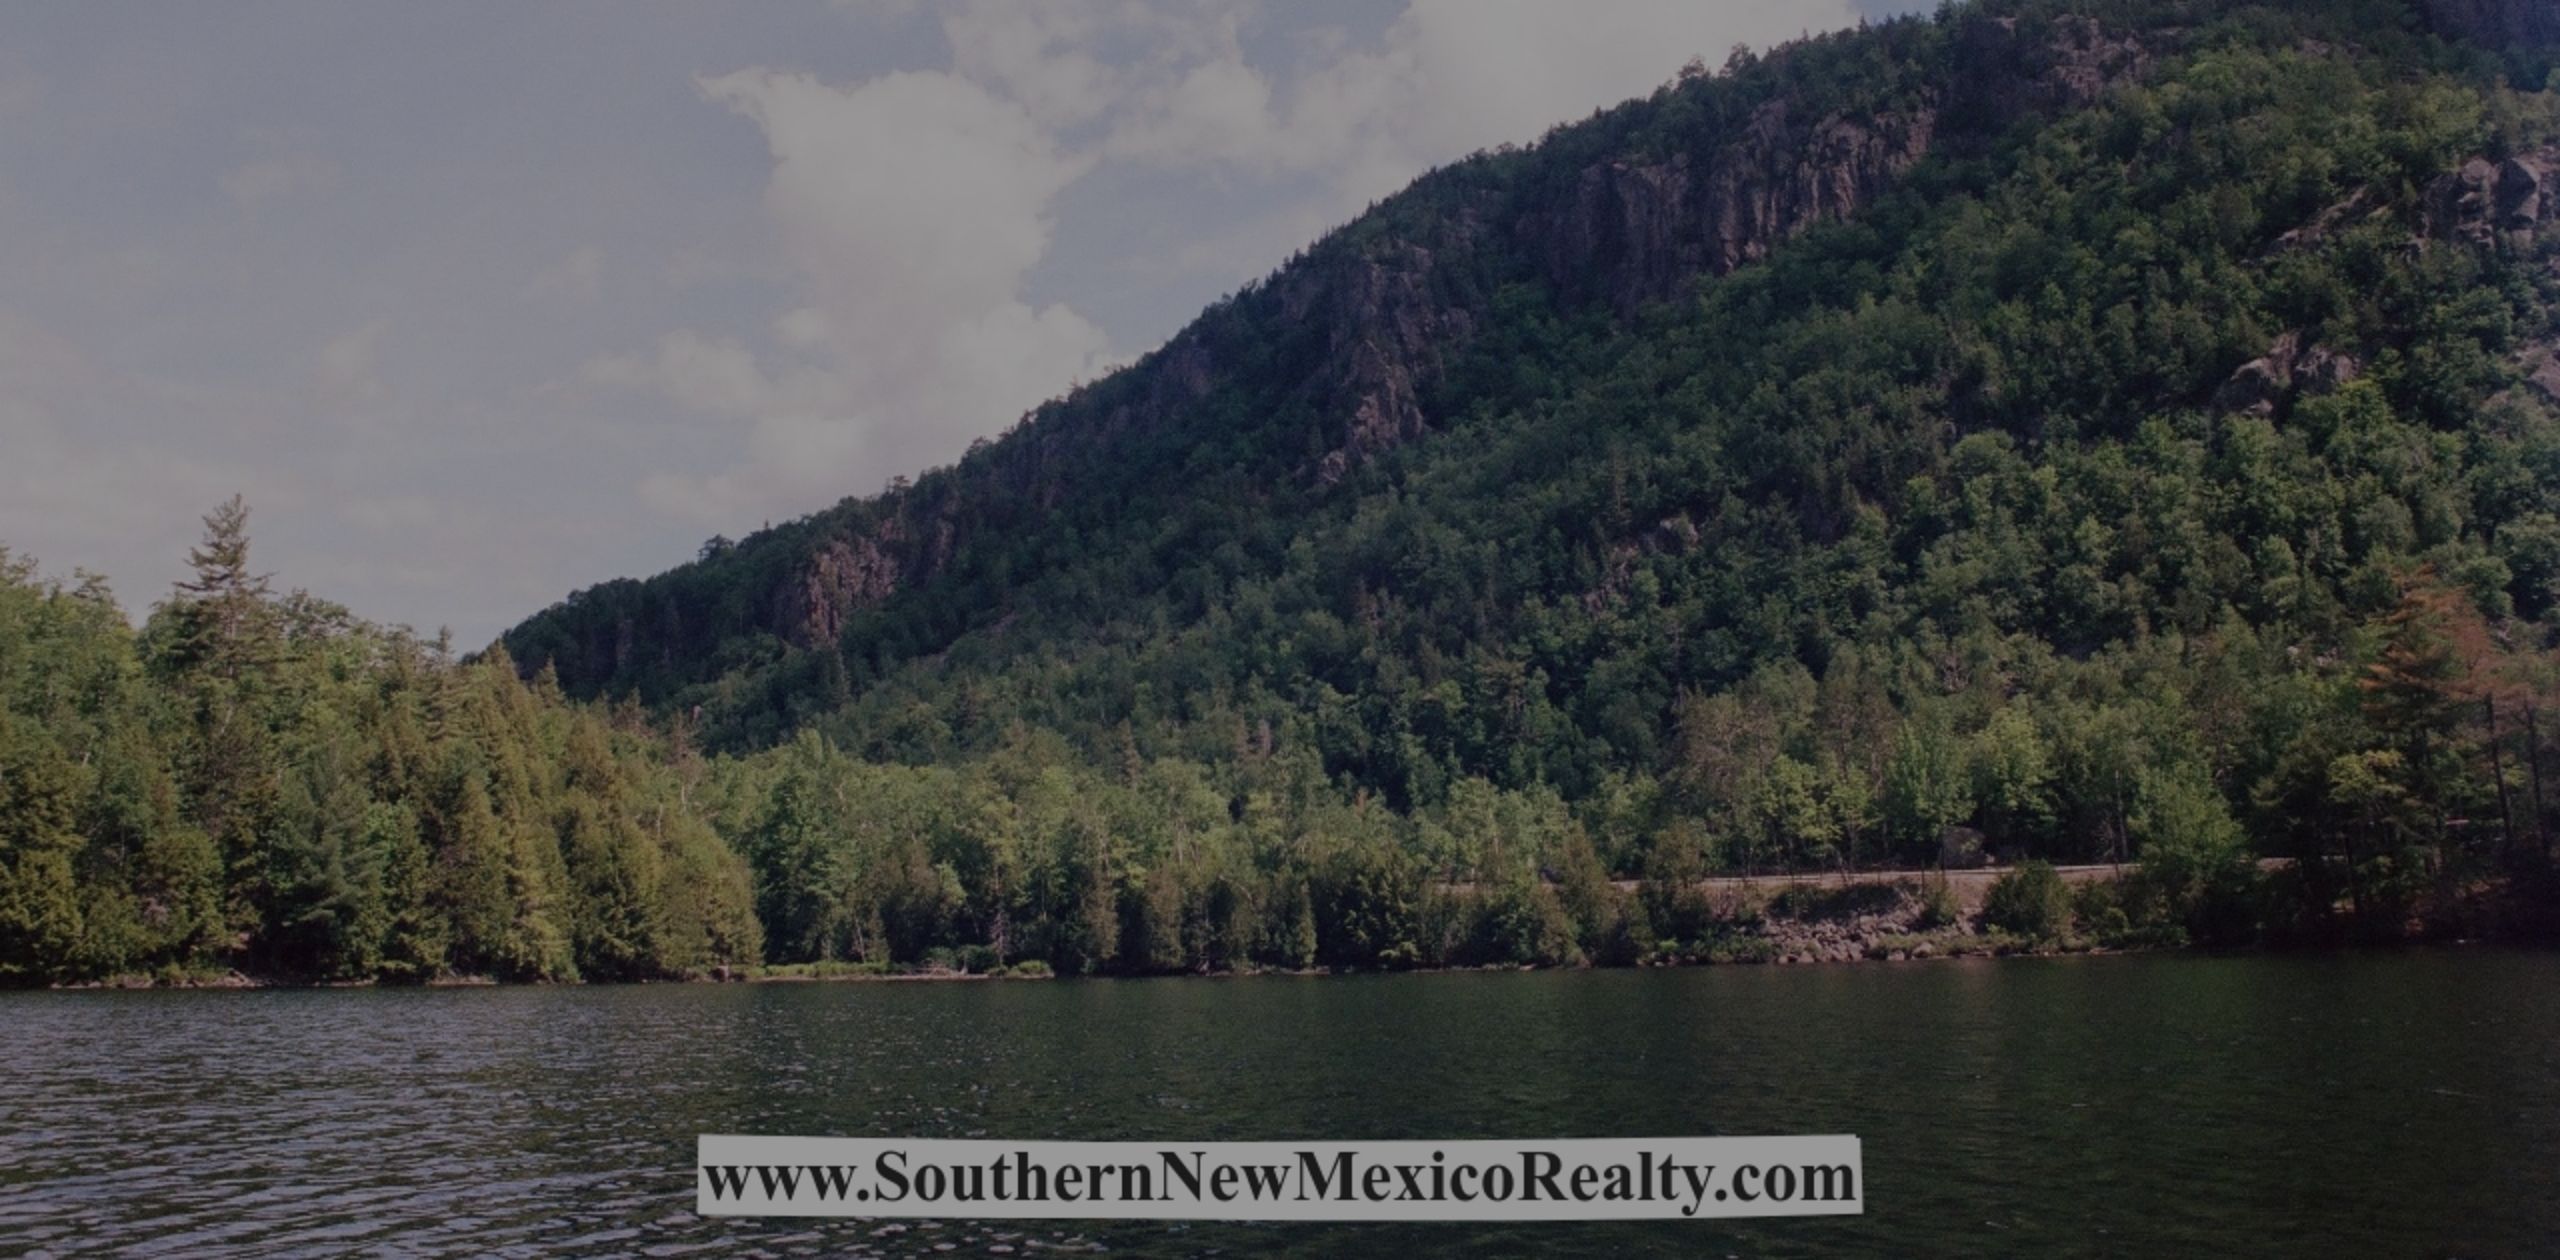 Top 8 Reasons to Move to the Ruidoso New Mexico Area